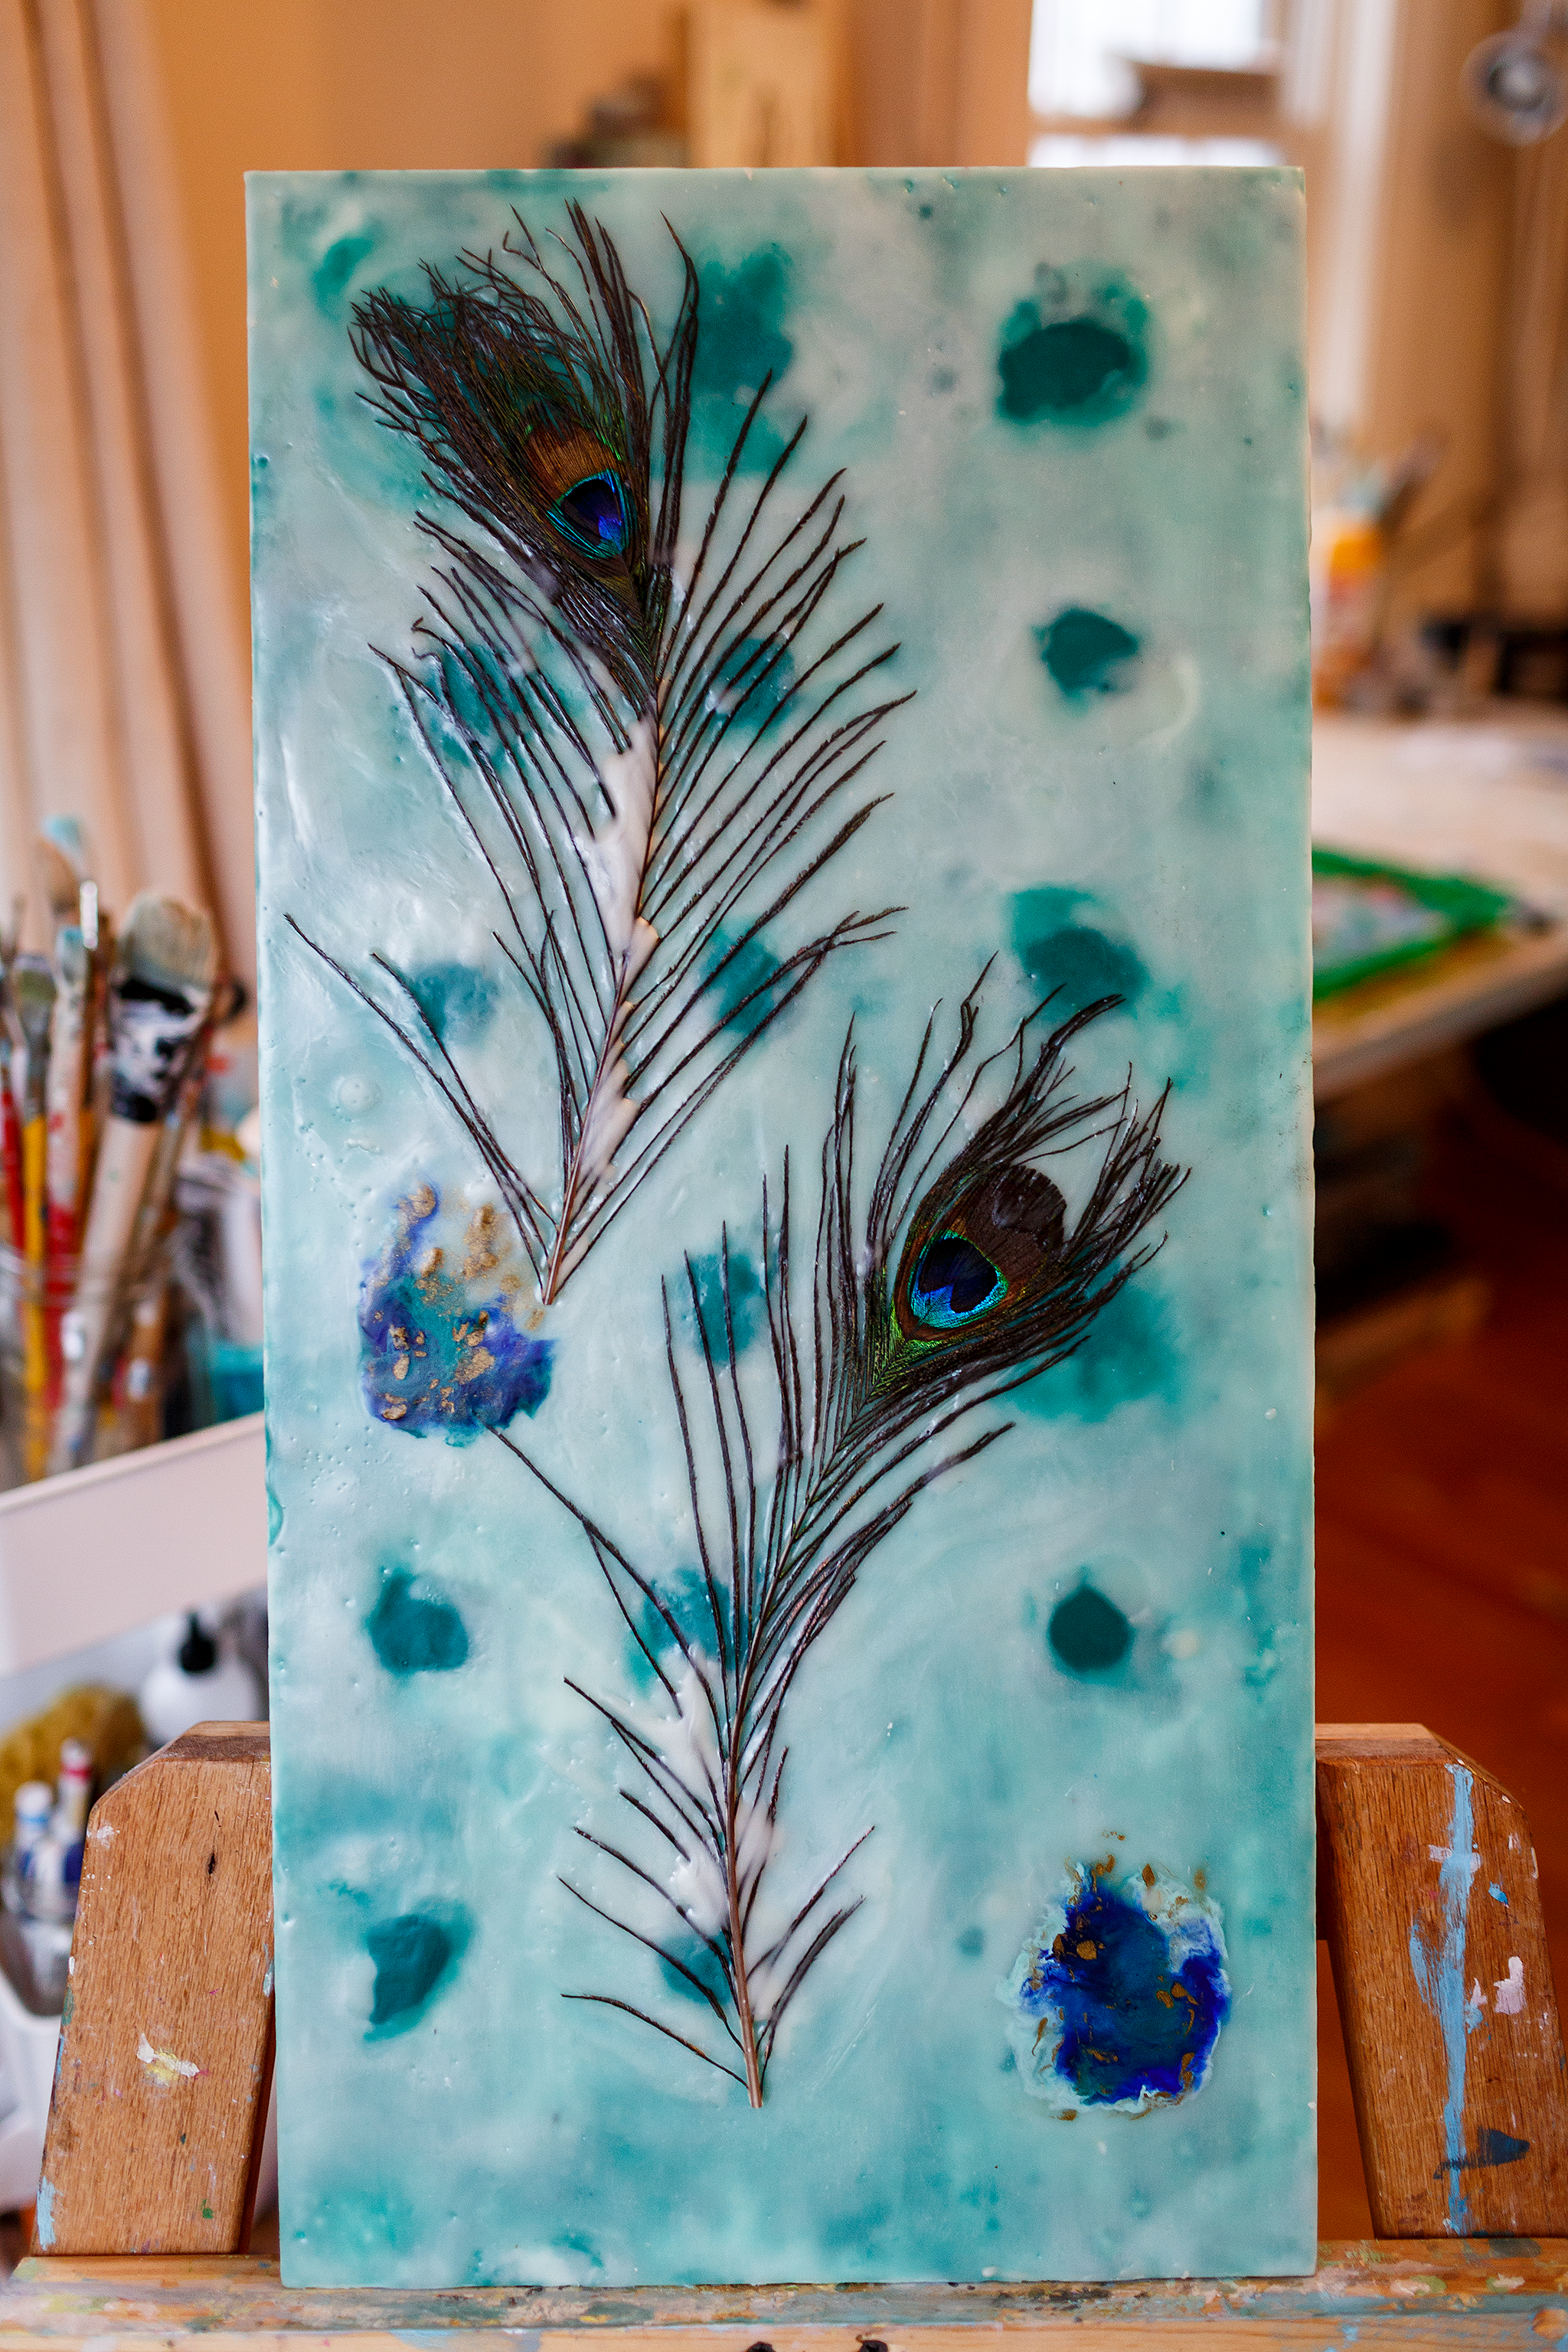 Encaustic painting of blue peacock feathers